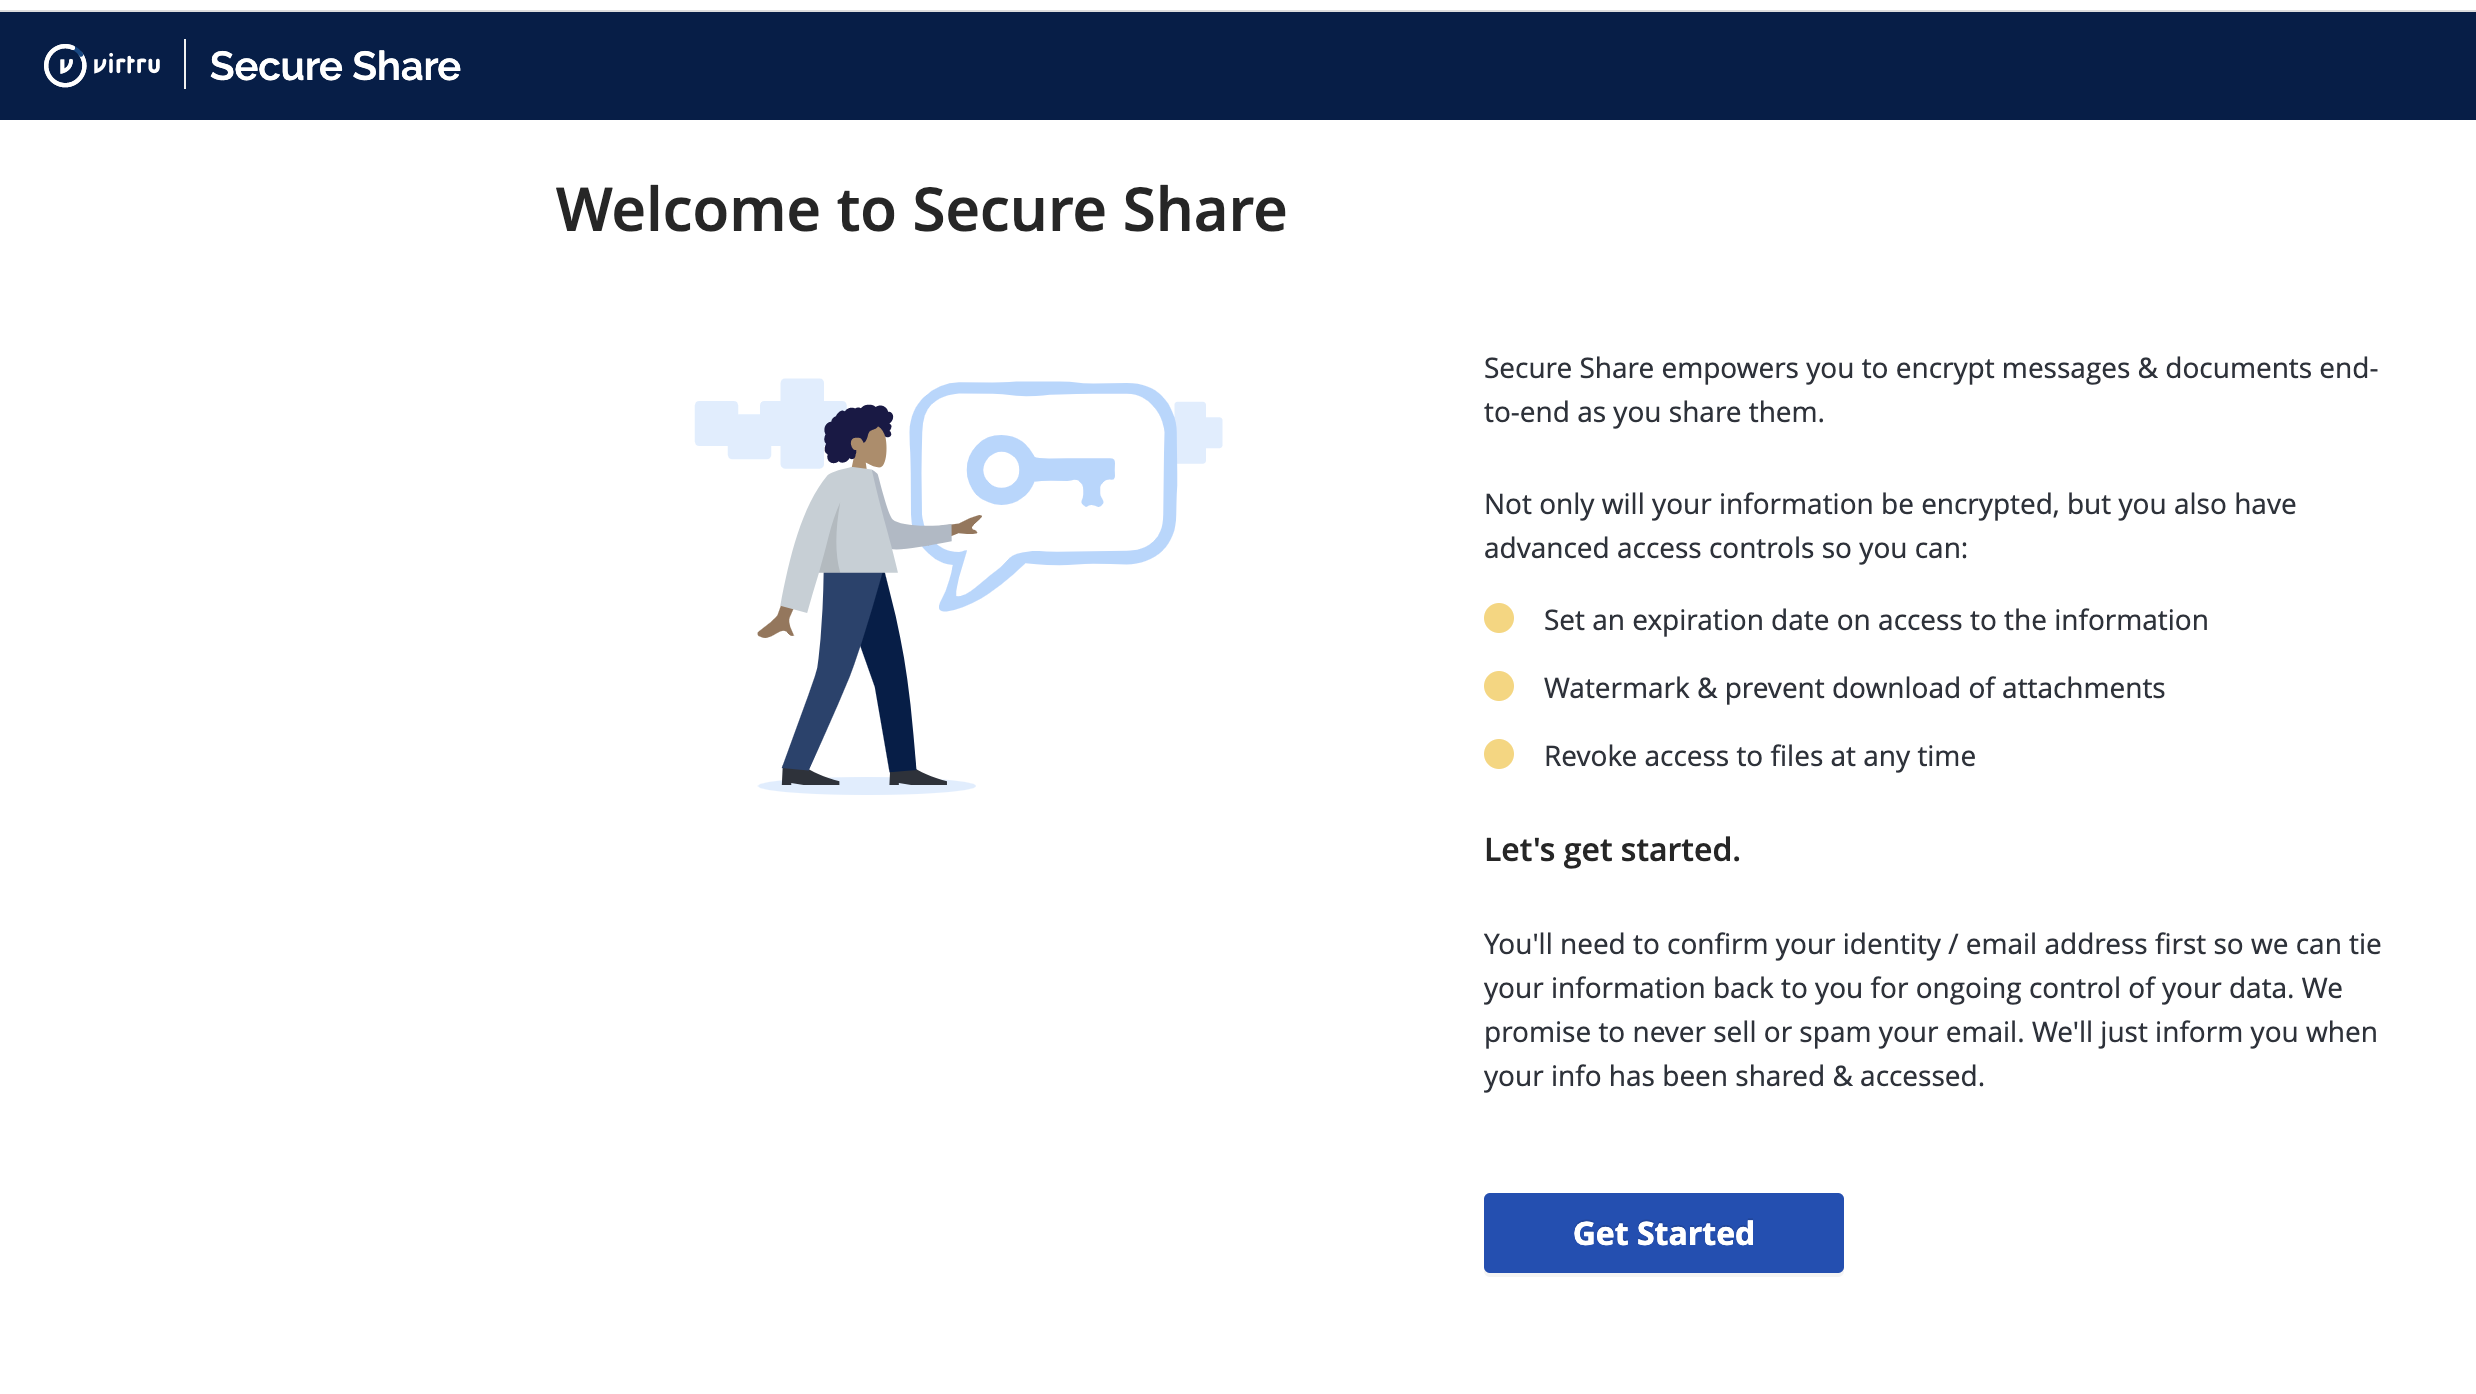 Welcome to Secure Share landing page